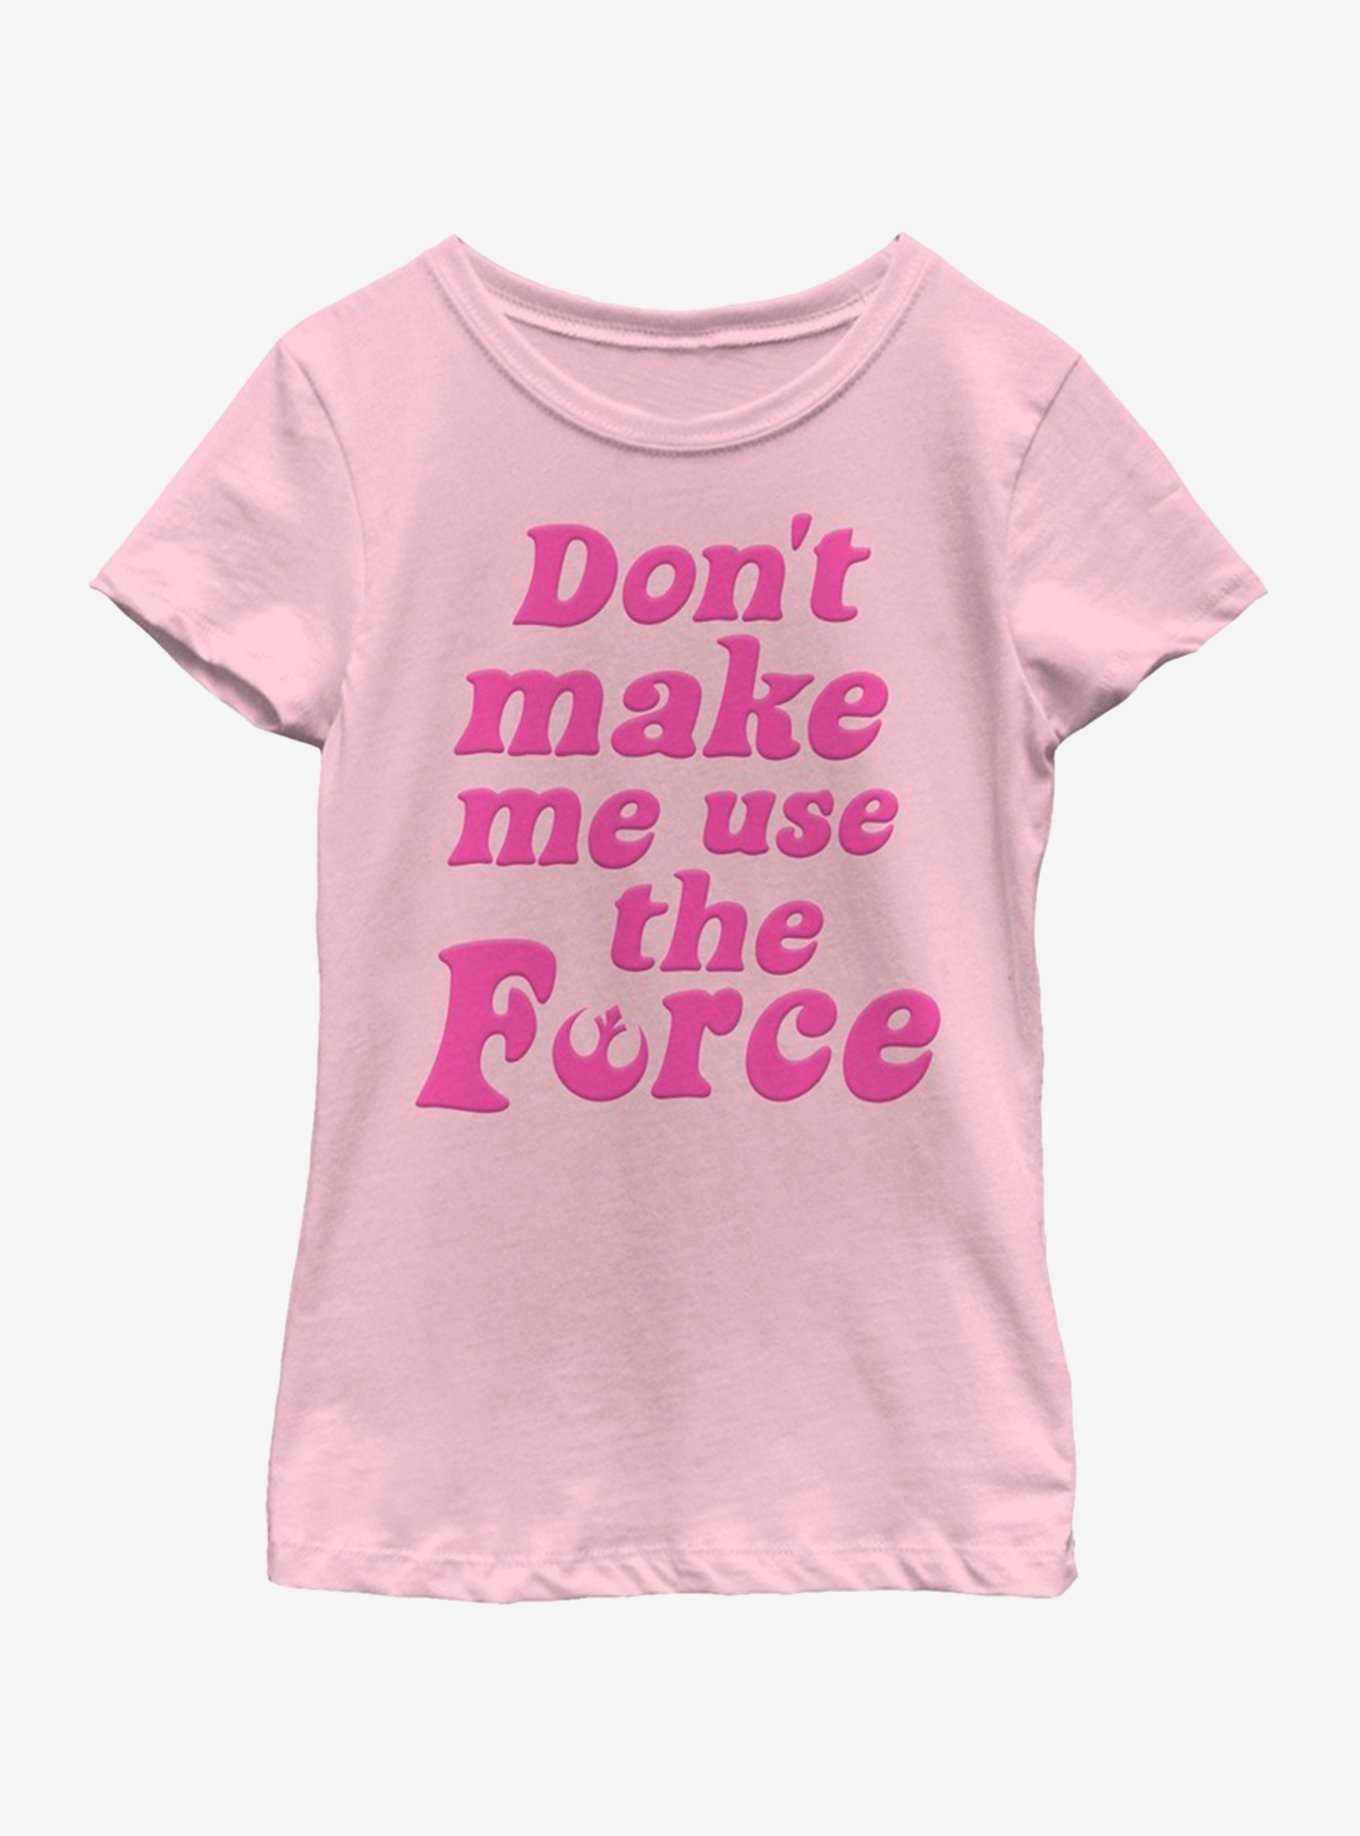 Star Wars Girls Can Do Anything Youth Girls T-Shirt, , hi-res